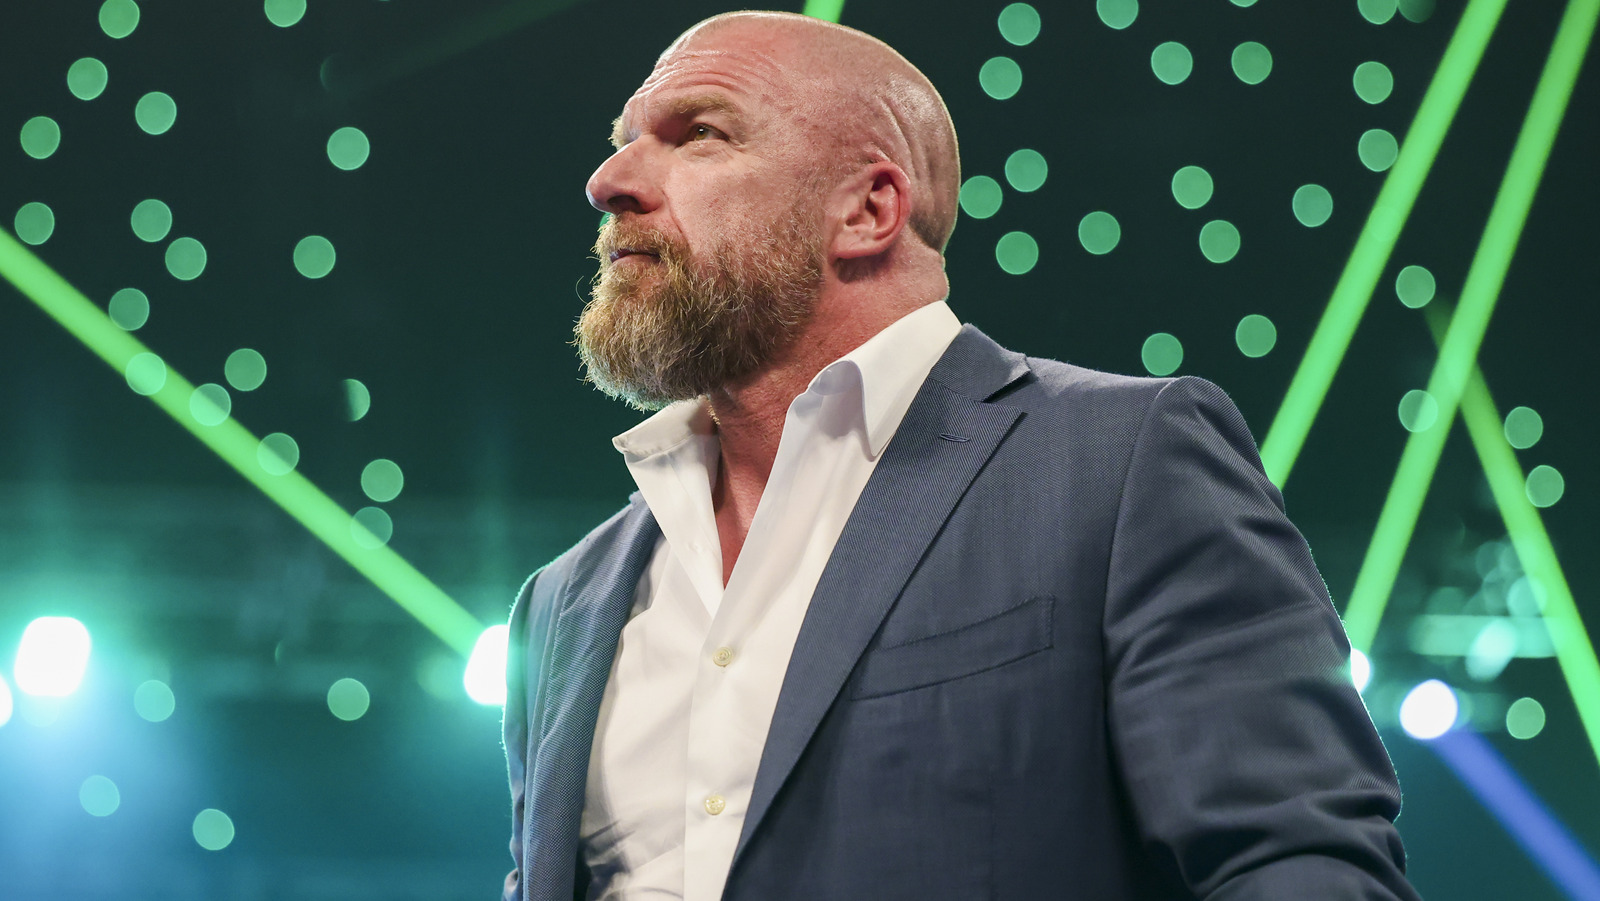 AEW's Kenny Omega Weighs In On WWE's Triple H As A Booker And A Wrestler